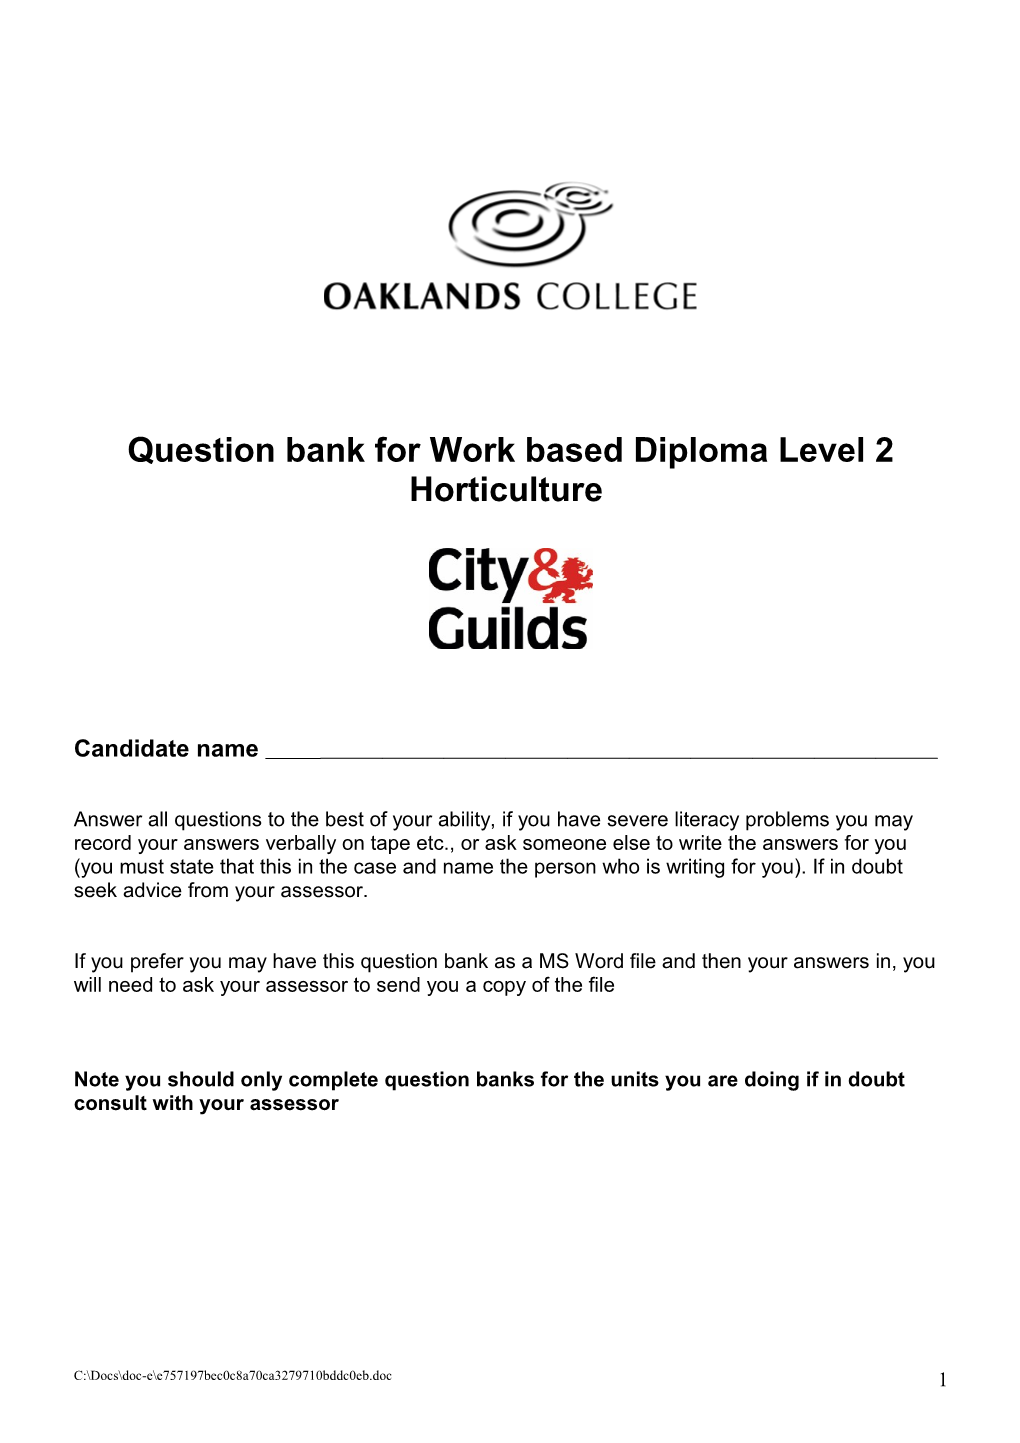 Question Bank for Work Based Diploma Level 2 Horticulture